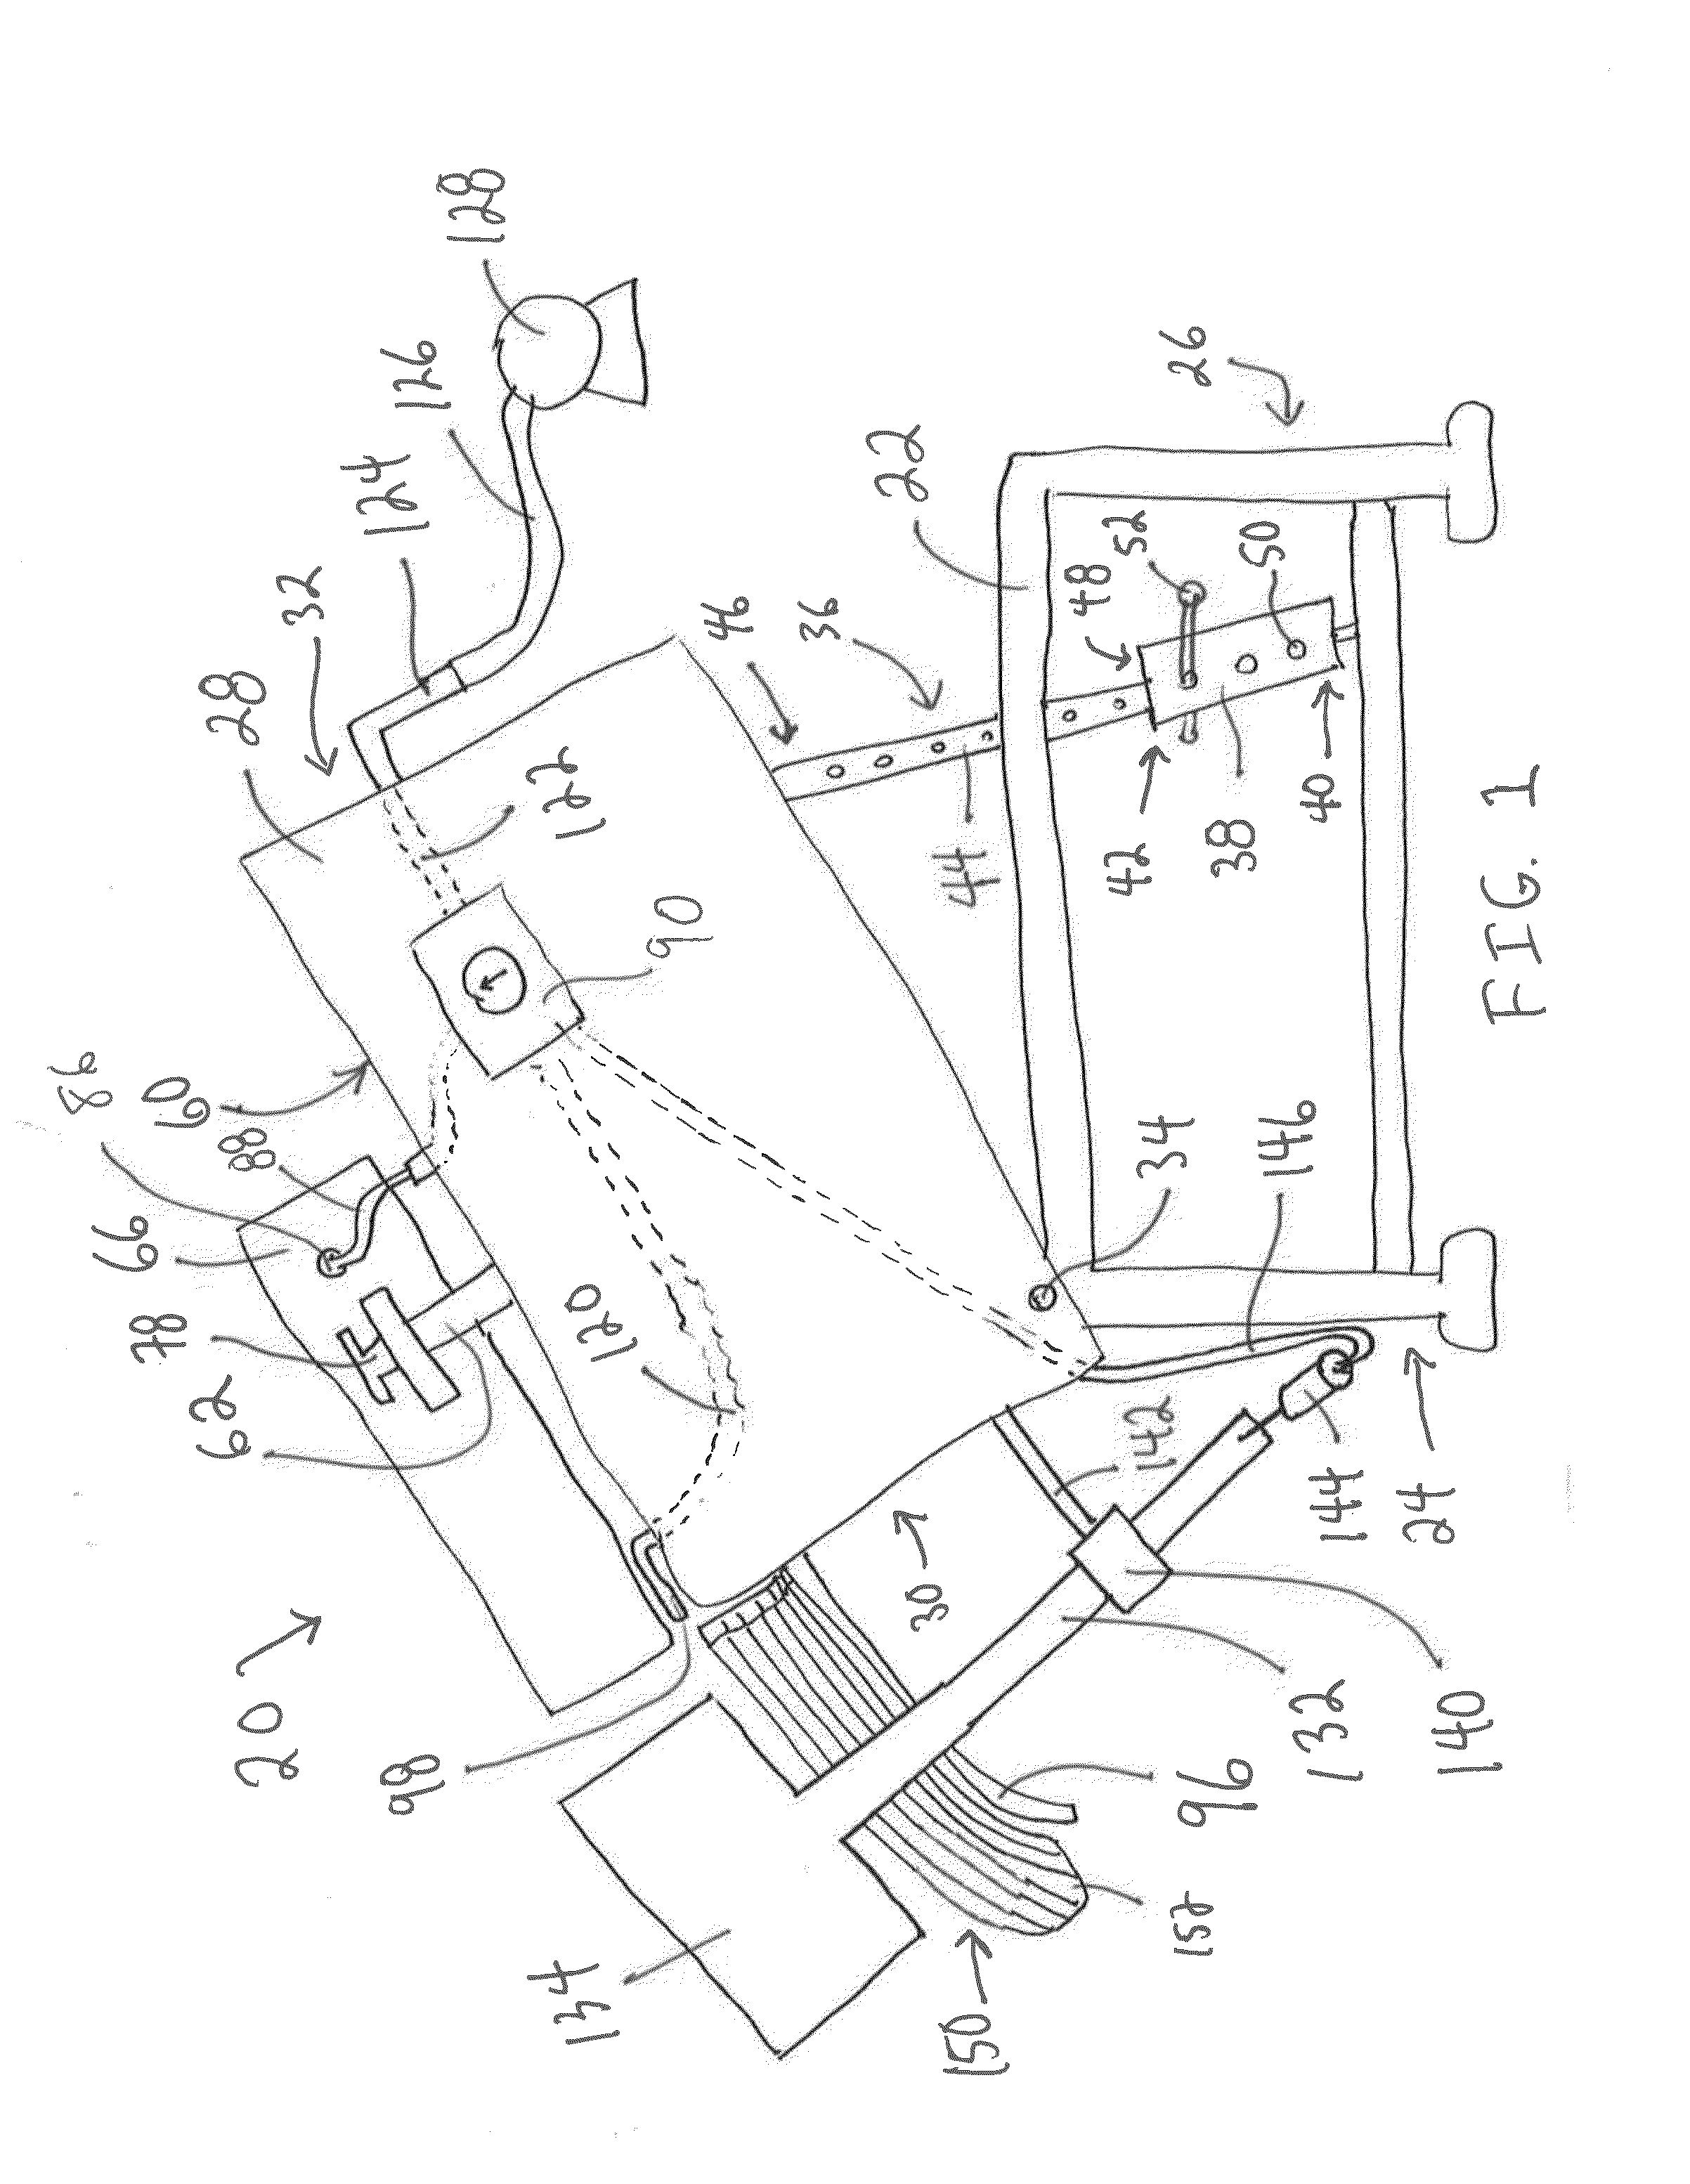 Poultry loader with alignment mechanism